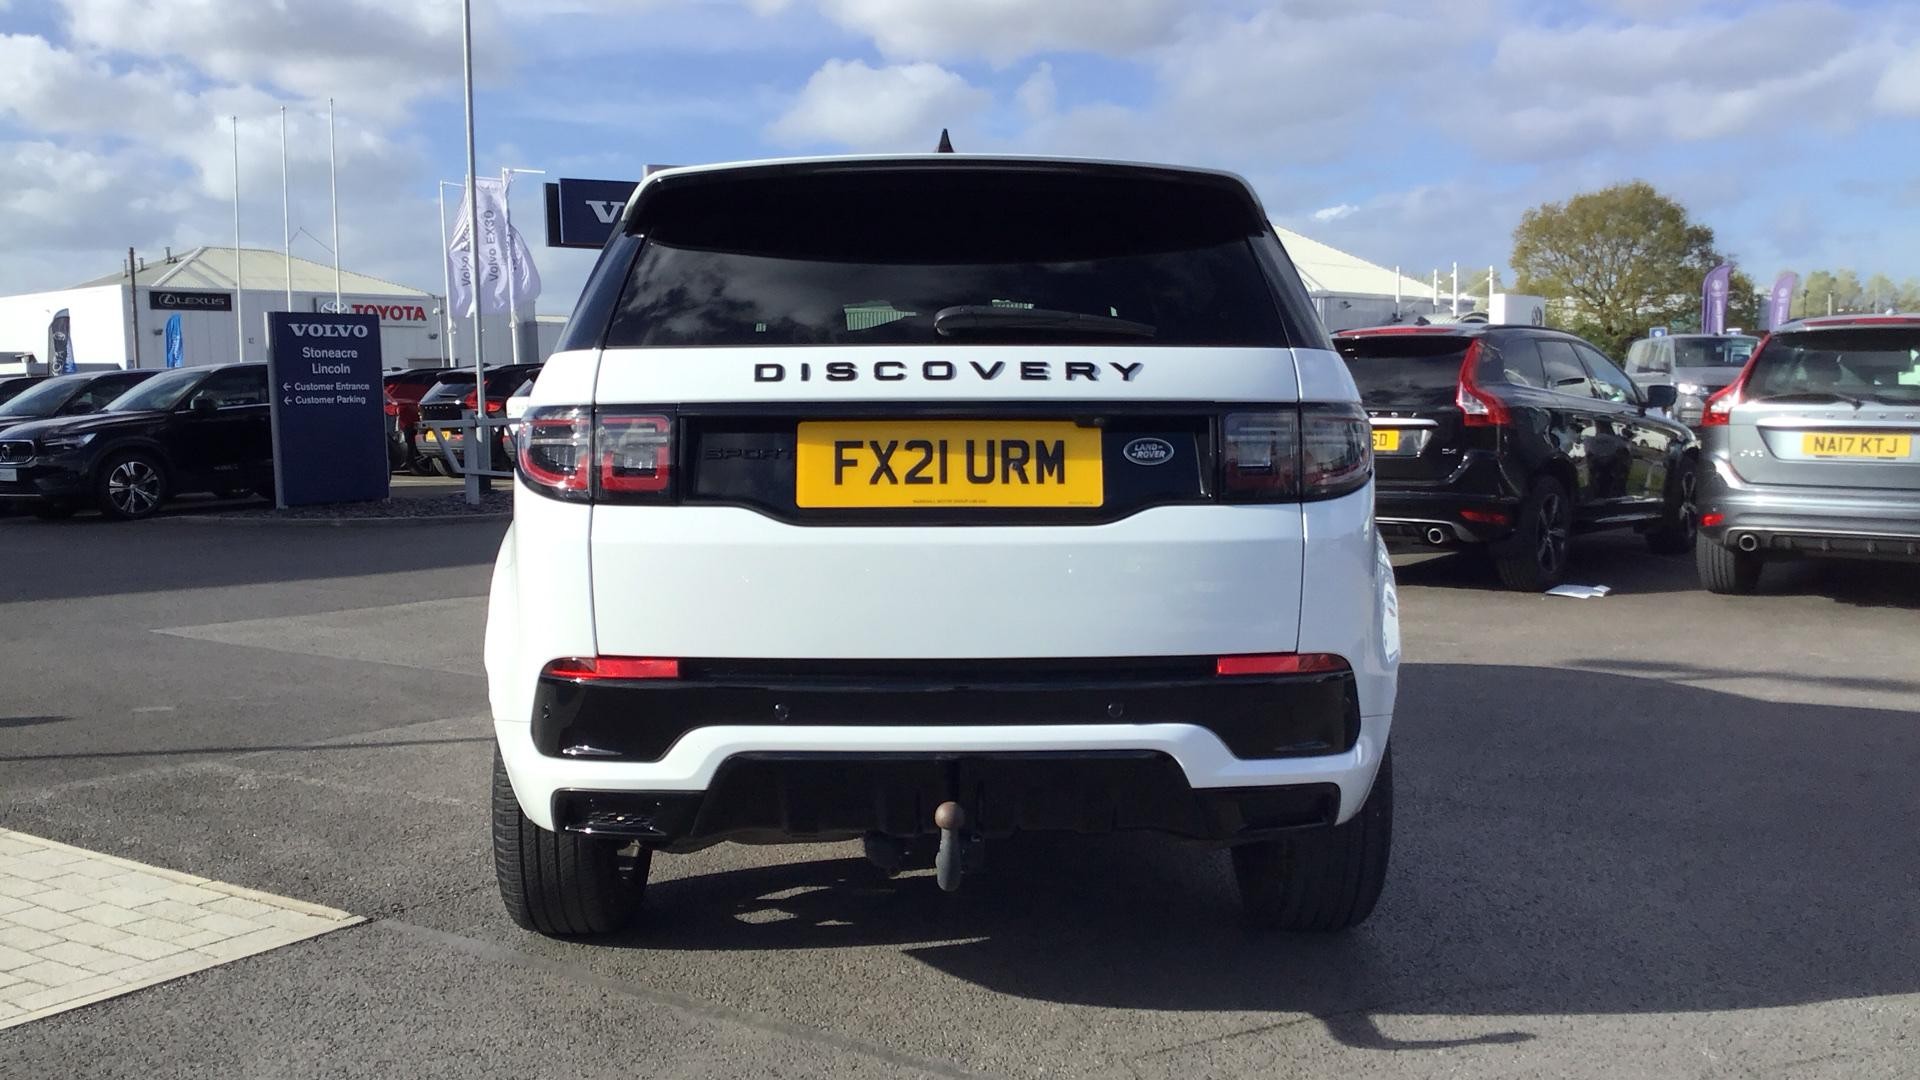 Land Rover Discovery Sport 2.0 D200 MHEV R-Dynamic S Plus Auto 4WD Euro 6 (s/s) 5dr (5 Seat) (FX21URM) image 12